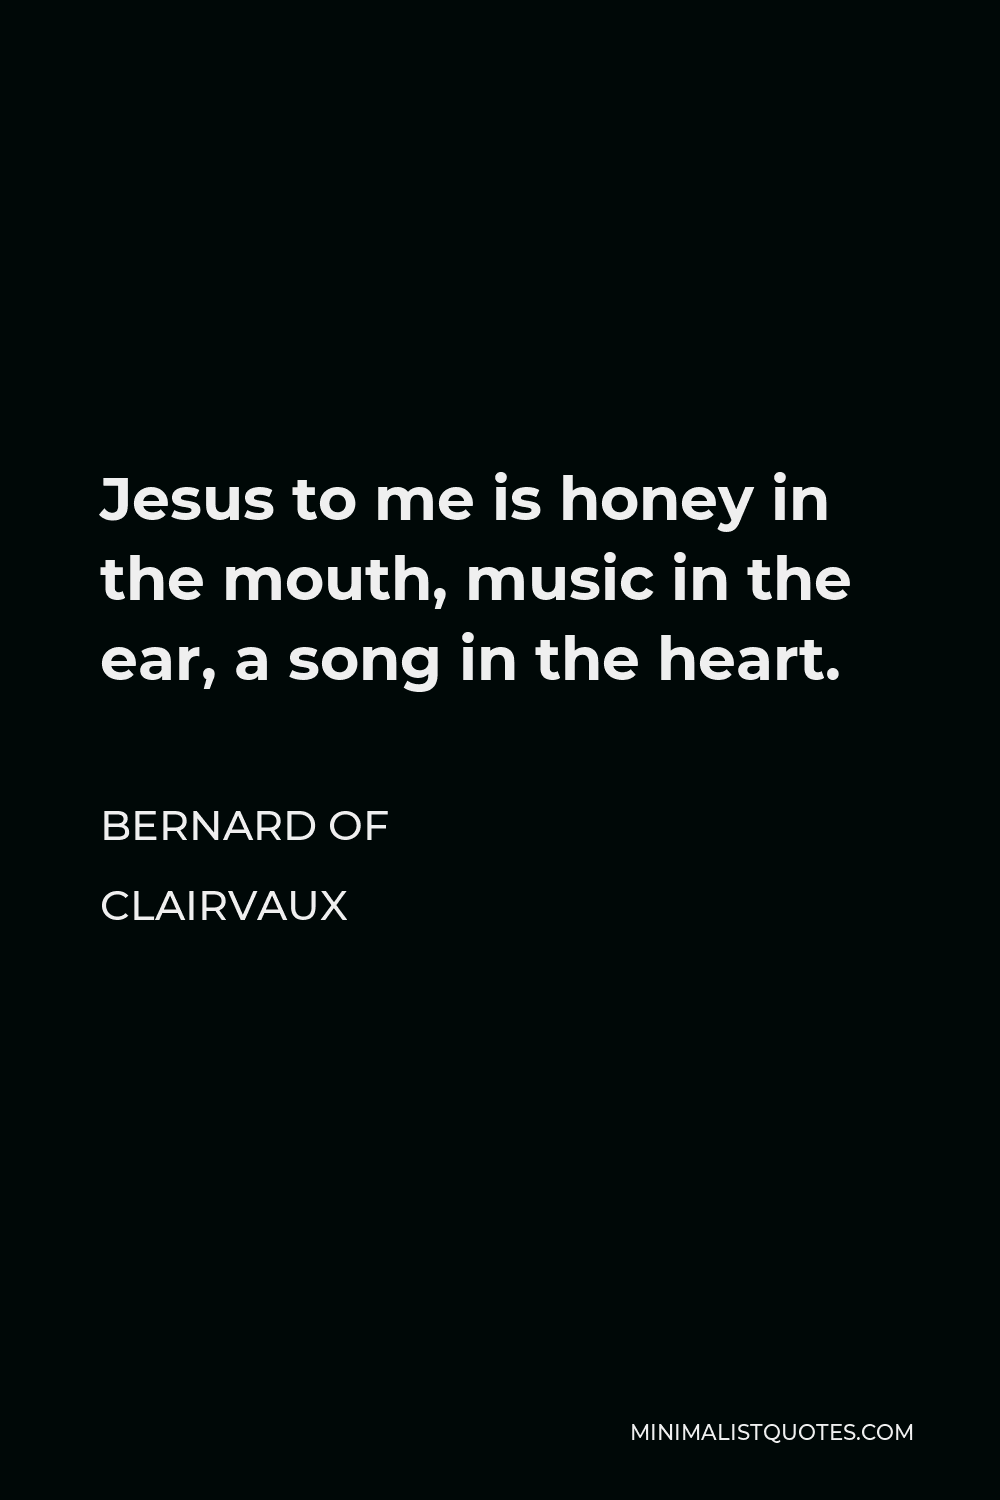 Bernard of Clairvaux Quote - Jesus to me is honey in the mouth, music in the ear, a song in the heart.